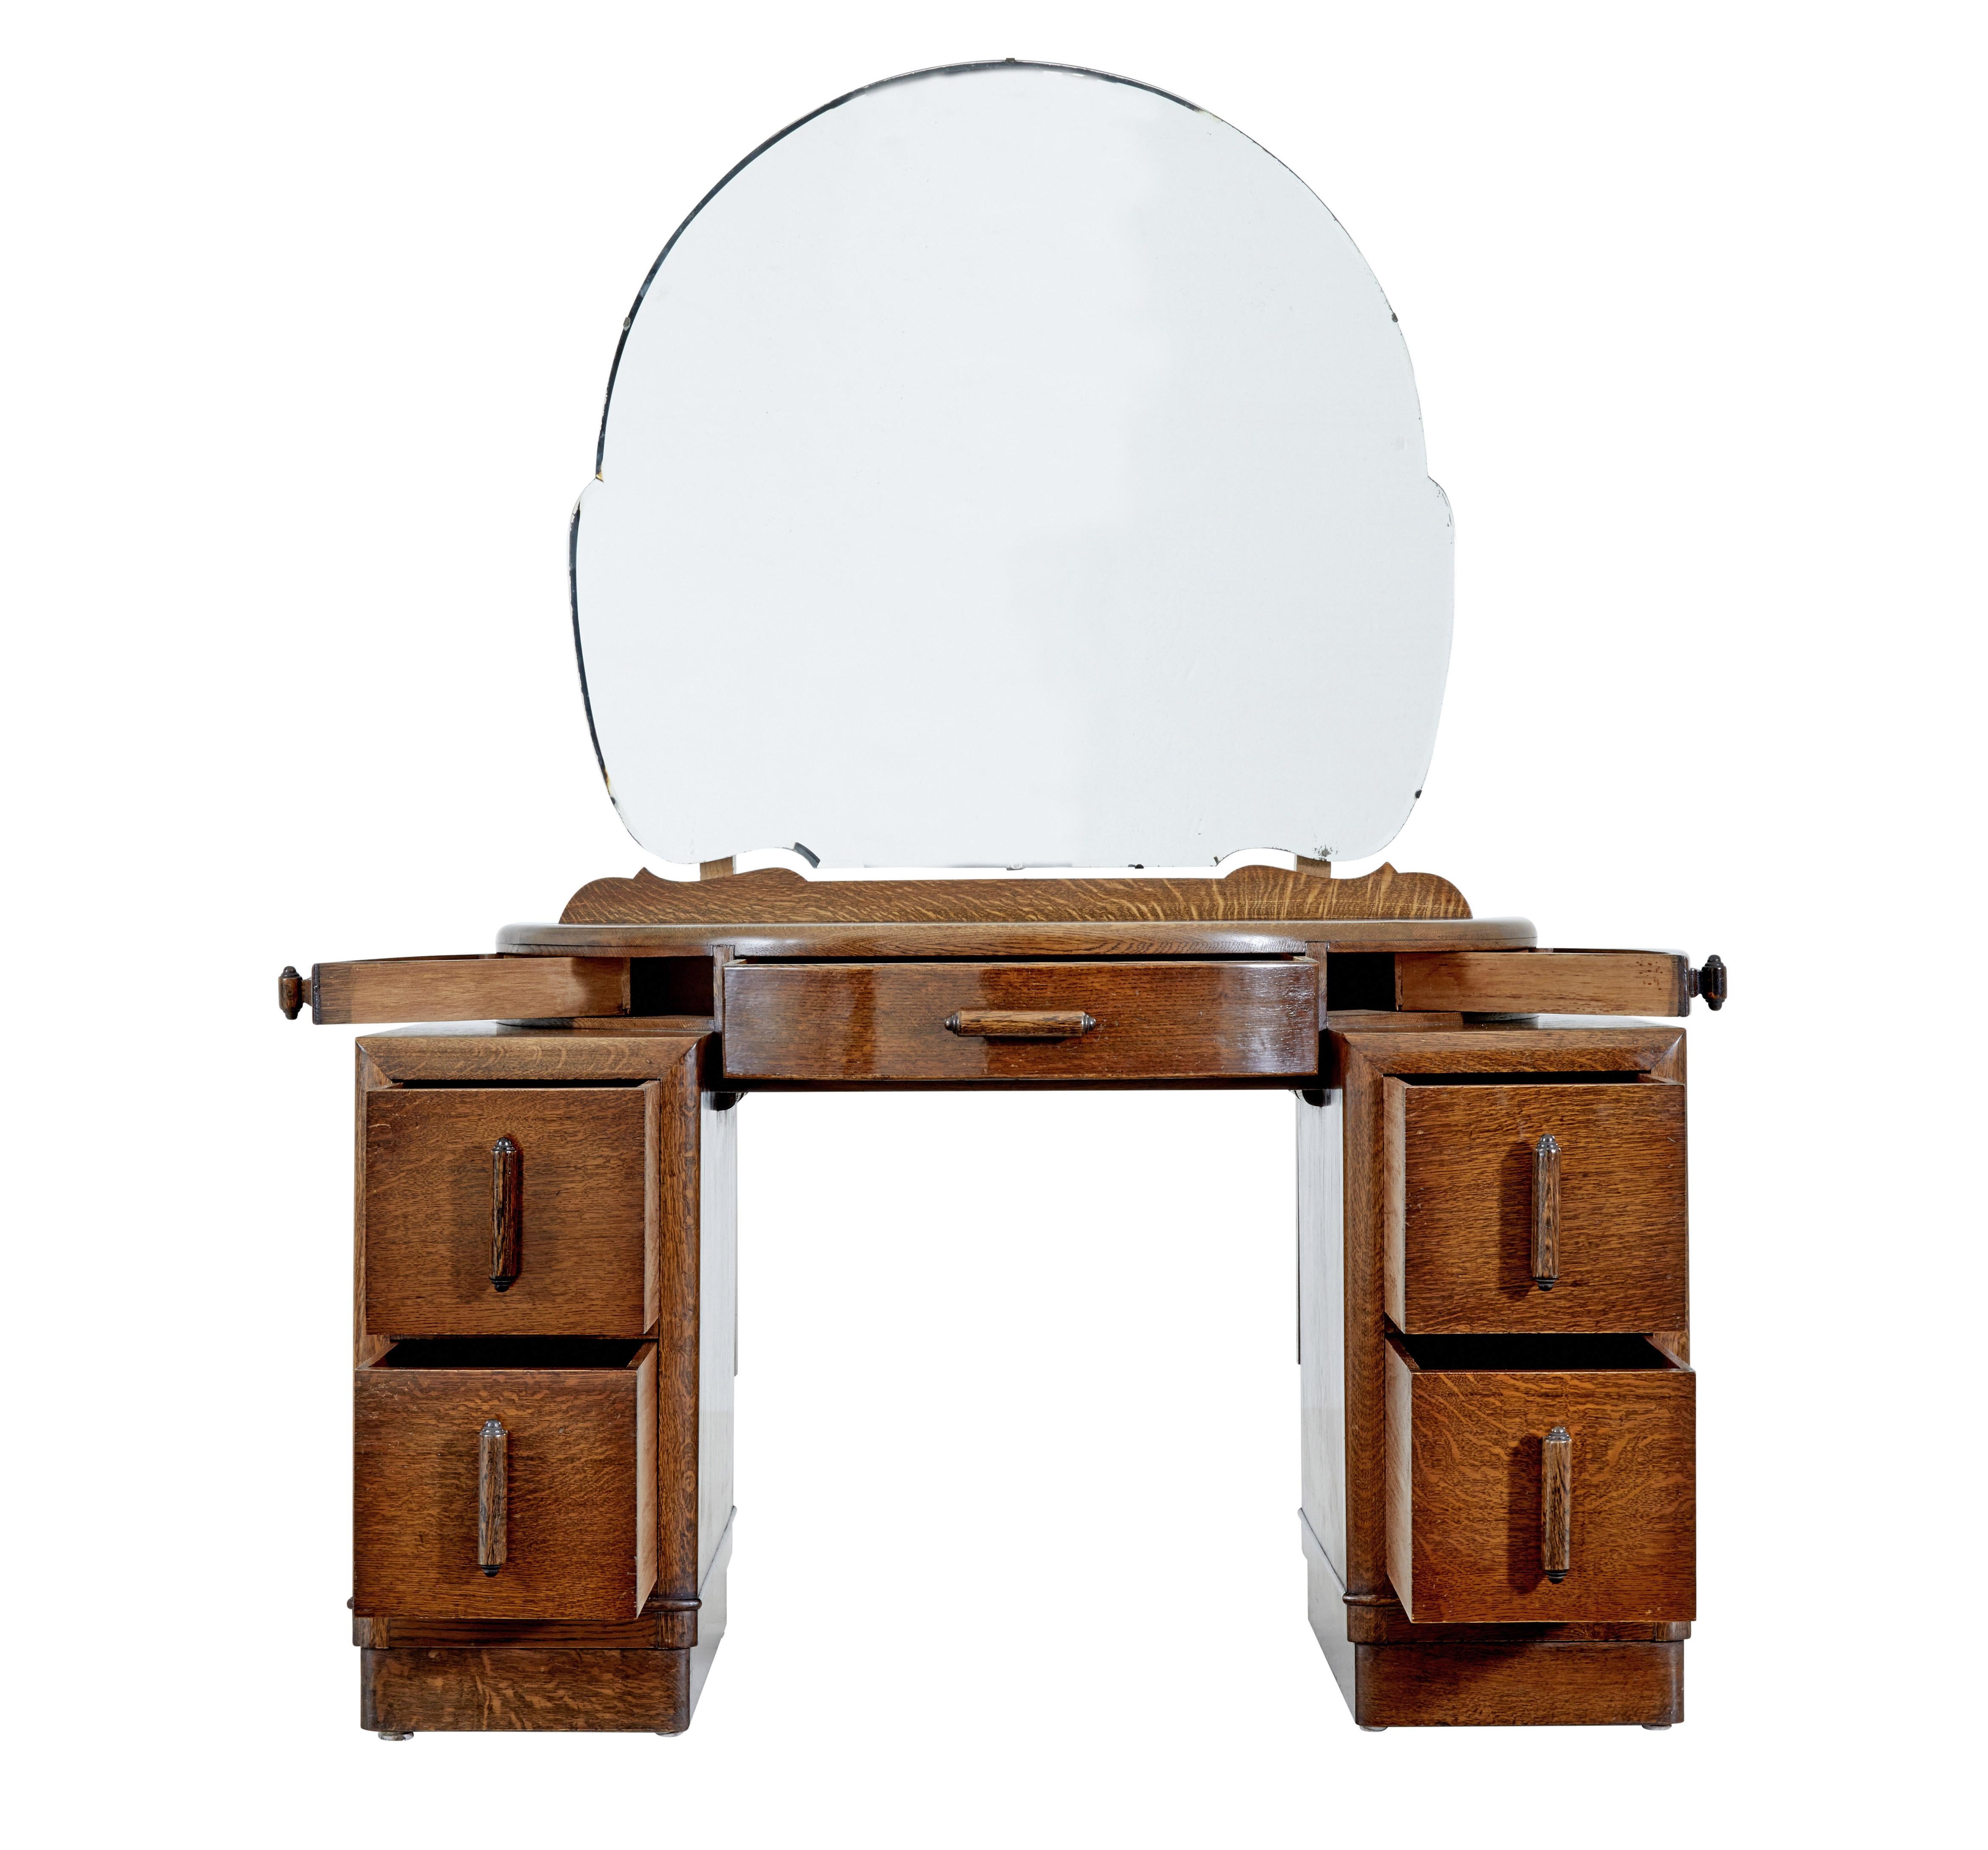 Art Deco oak dressing table with mirror circa 1930.

English made by Sheard Binnington and co of doncaster.  Shaped mirror with bevelled edge which fixes to the demi lune top surface which features a drawer above the knee and 2 swing out